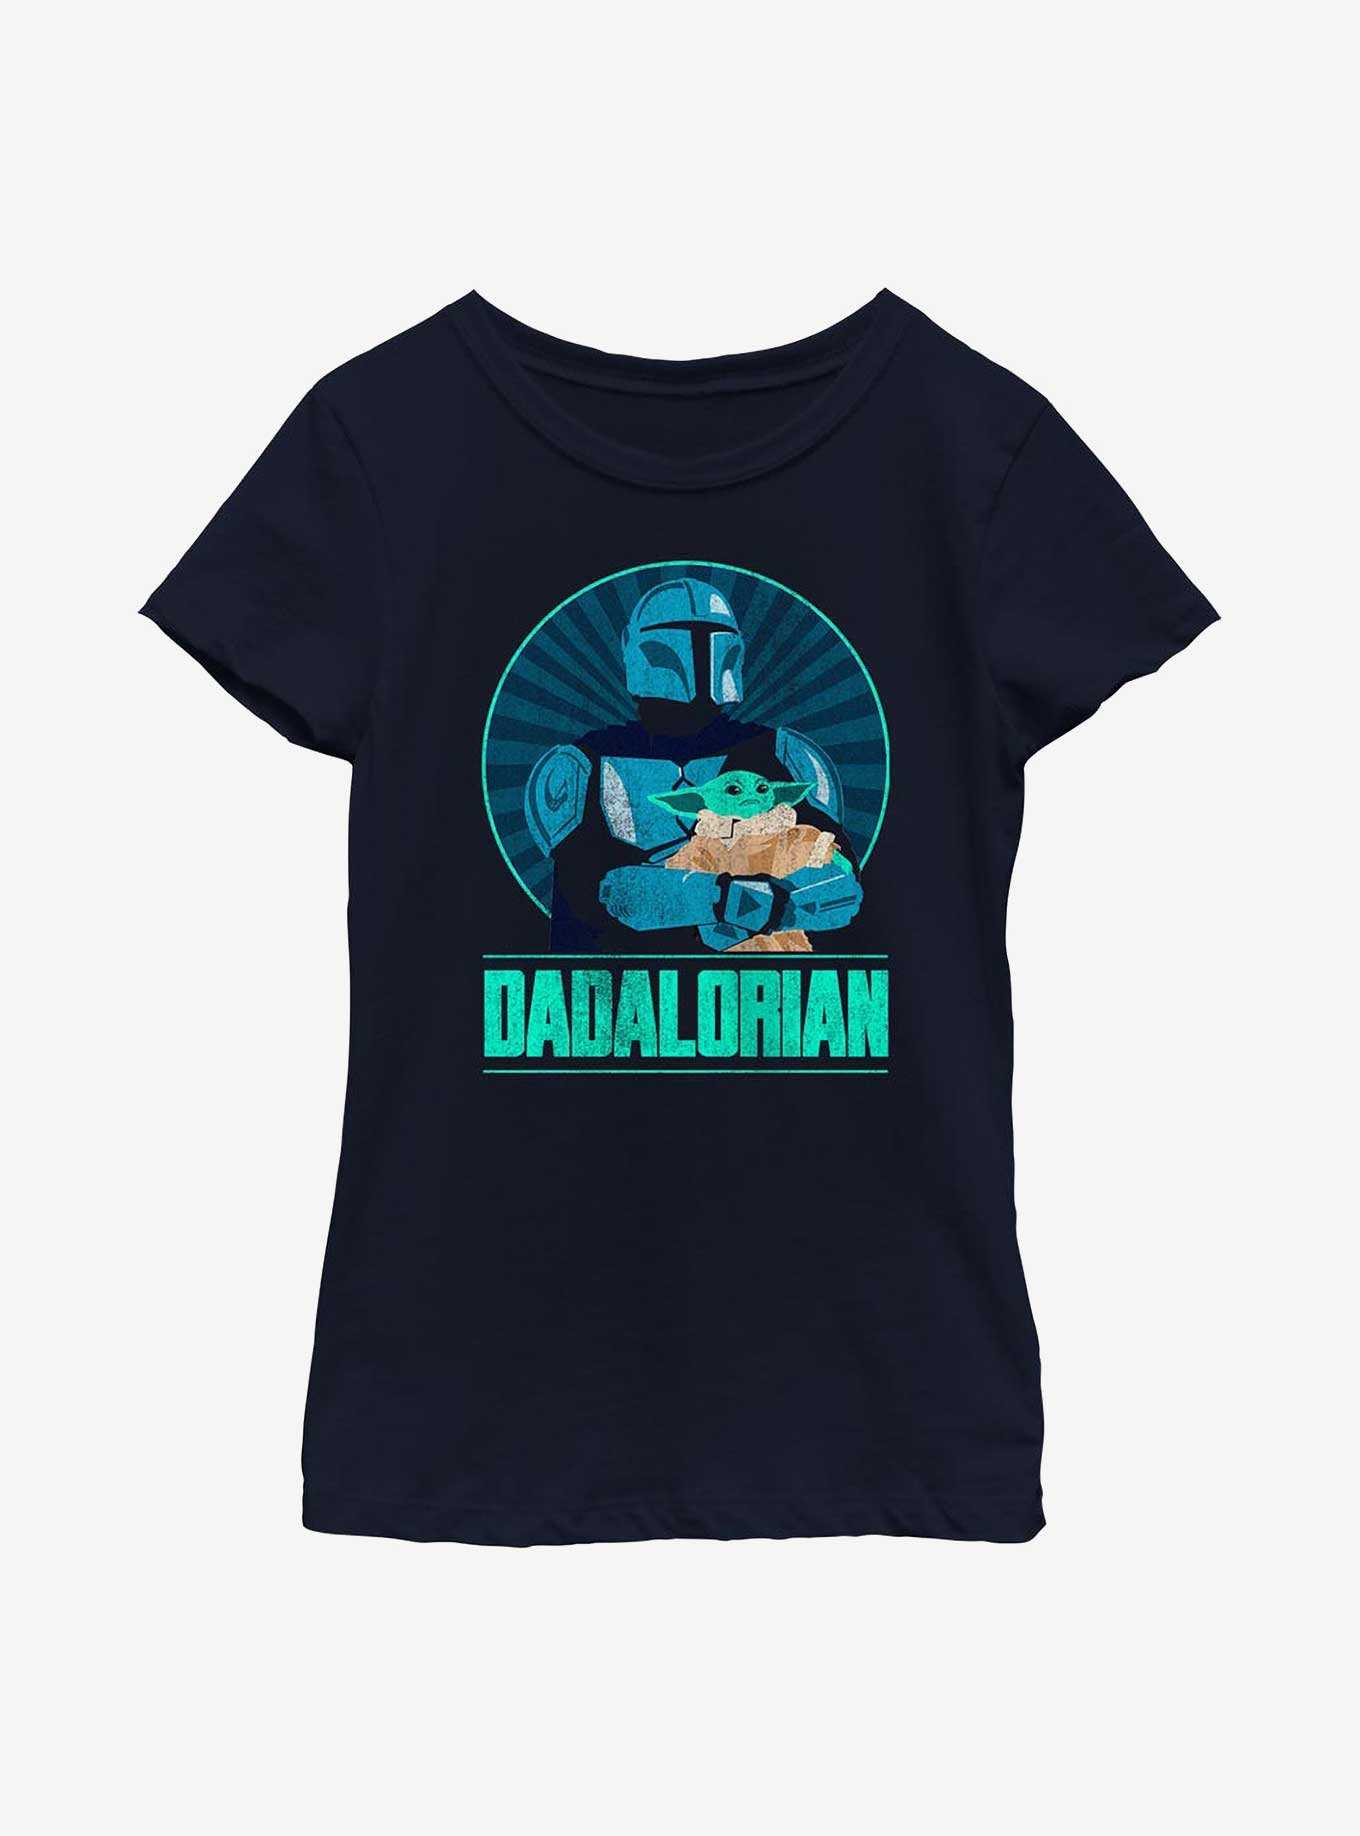 Star Wars The Mandalorian Dadalorian Father and Son Portrait Youth Girls T-Shirt, , hi-res